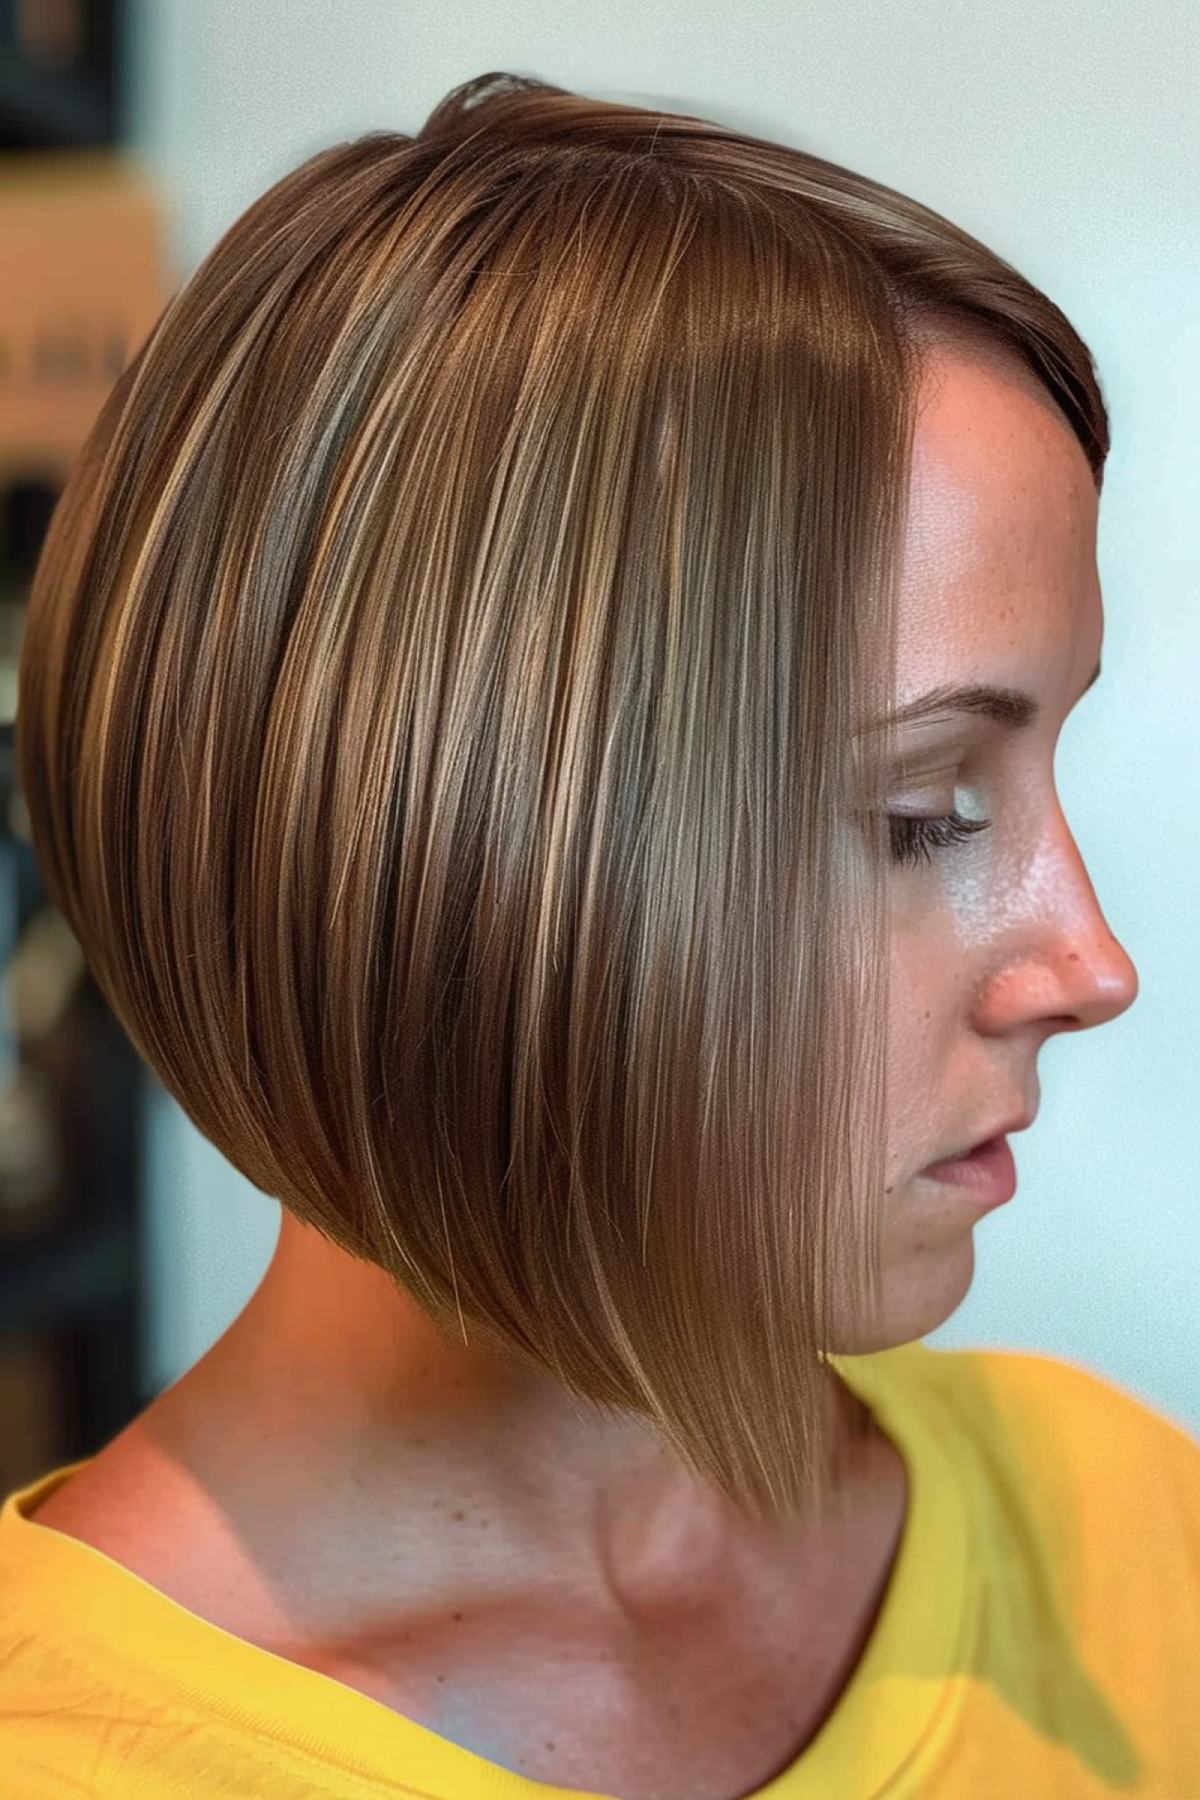 Chin-Length Straight Wedge Bob Hairstyle with Brown and Blonde Highlights